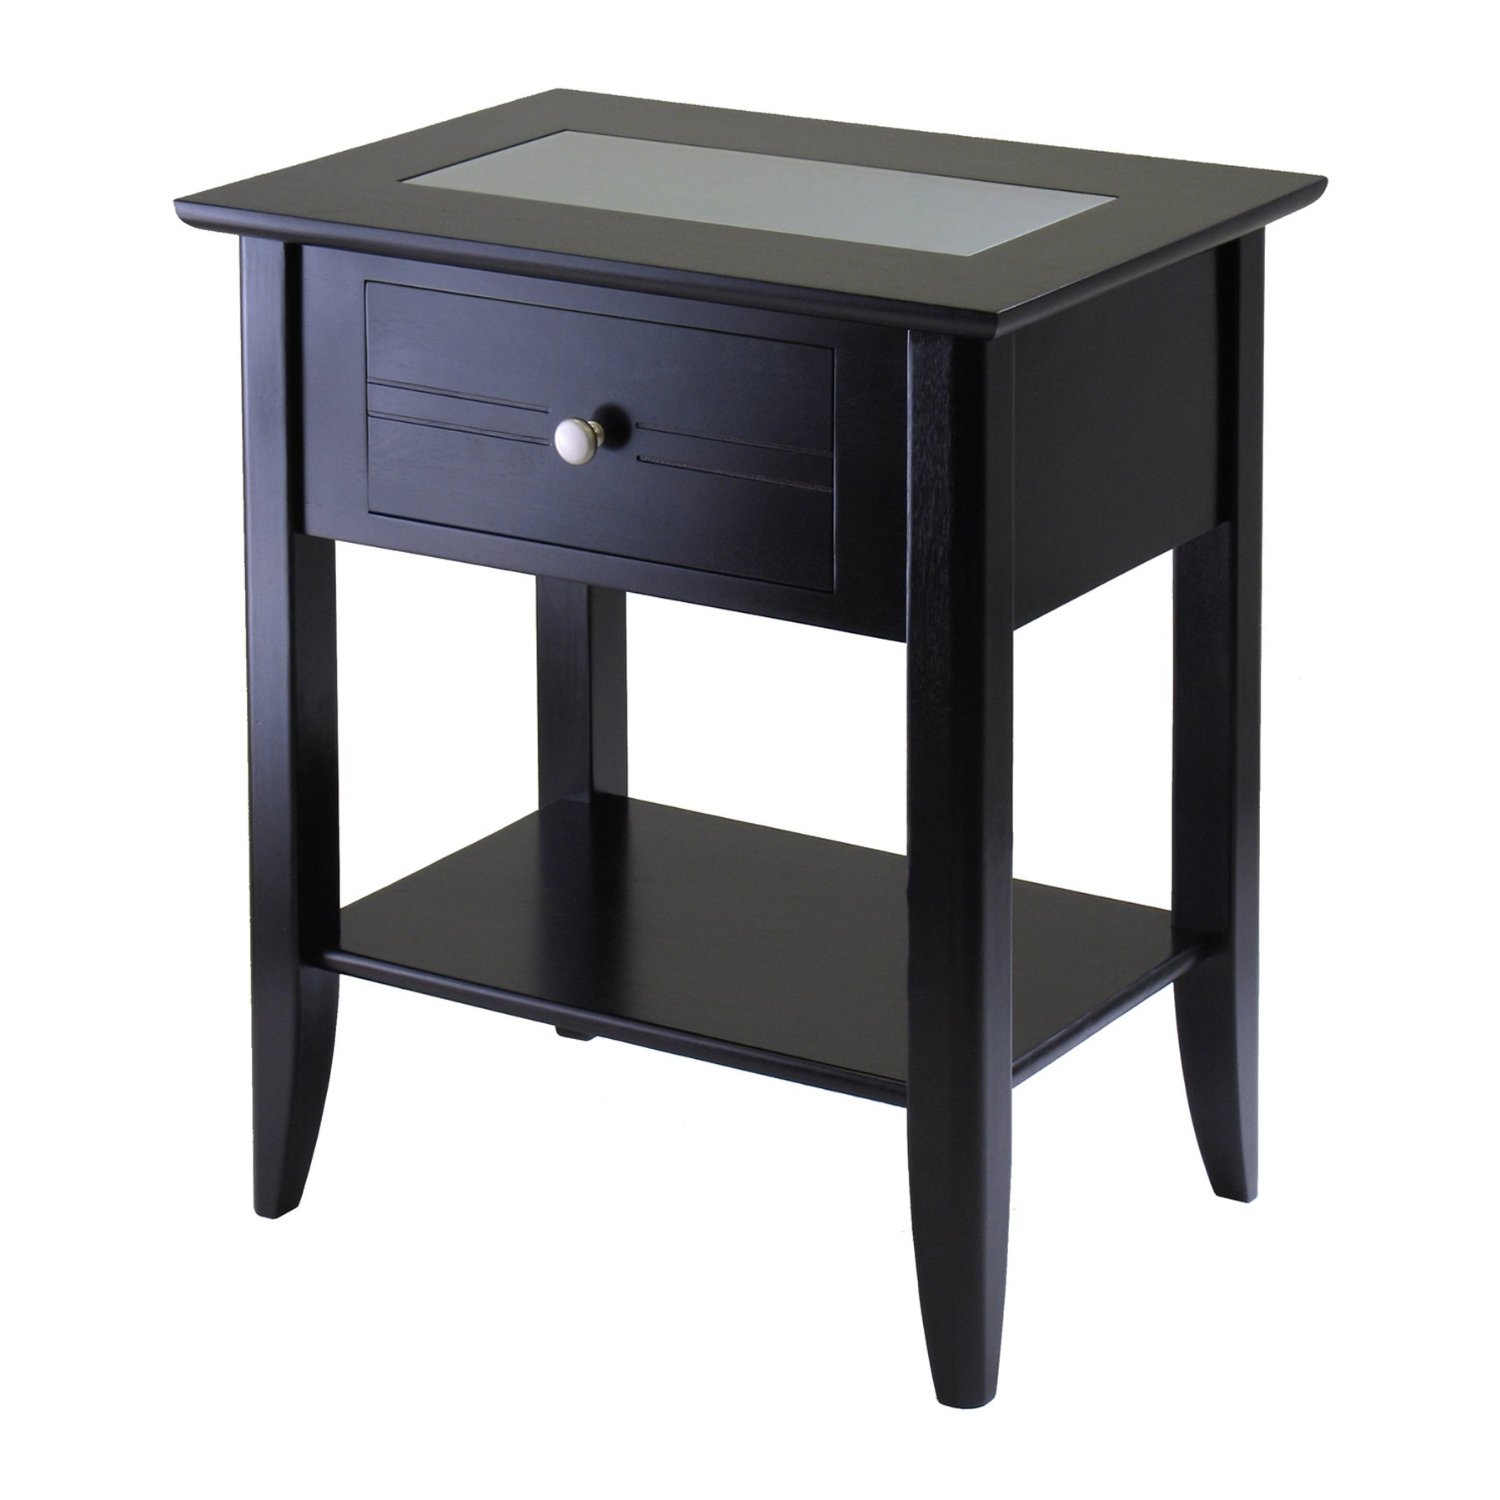 off crate barrel brown black lacquer table retro oak wood side with shelf stretcher and marilyn accent dog wash tub pier one imports dining room round glass metal end tables